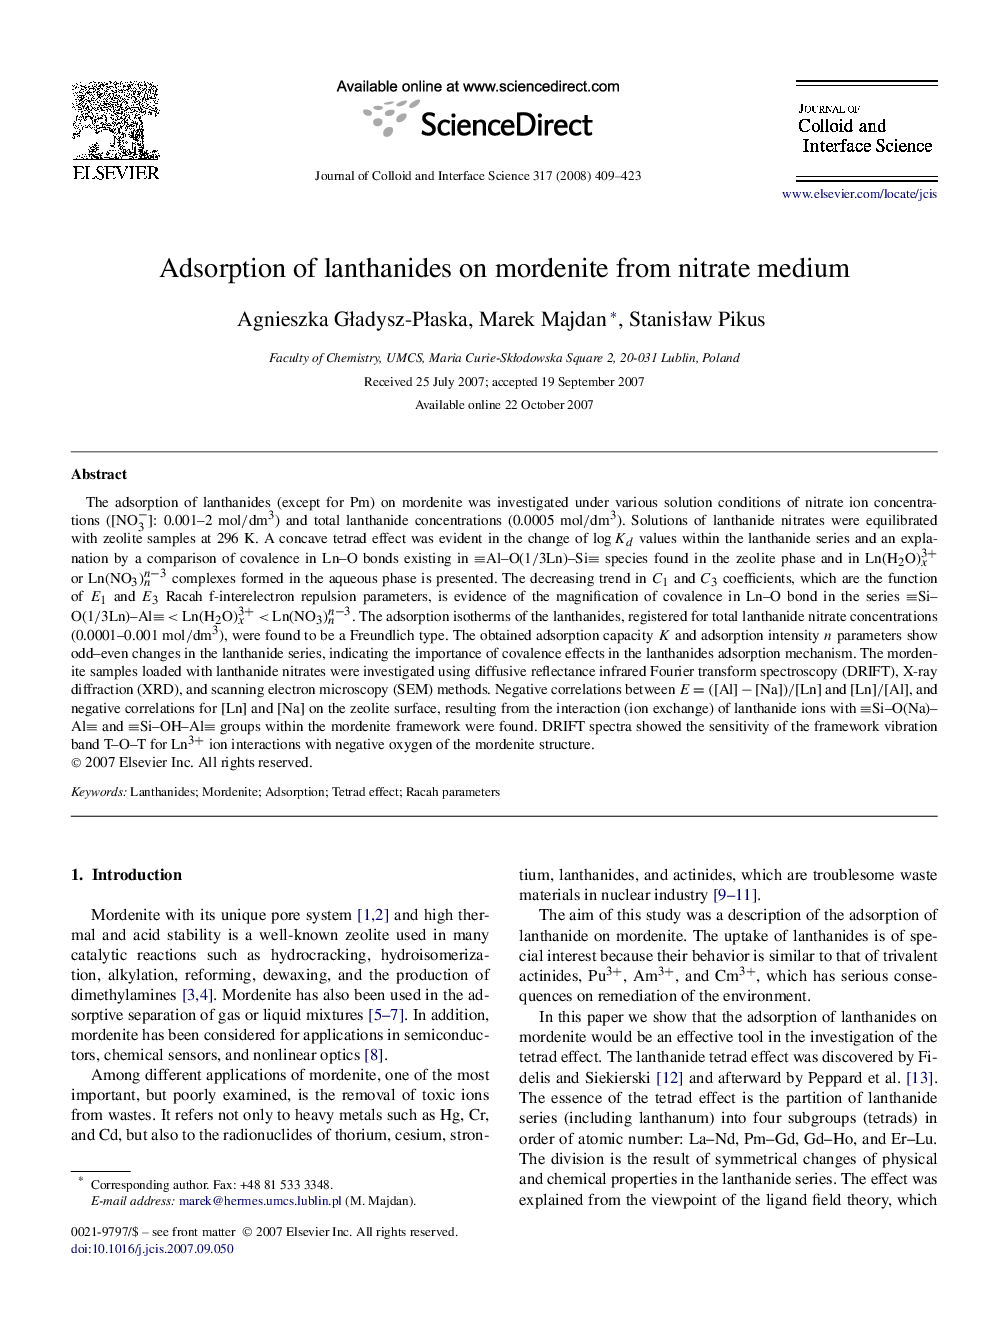 Adsorption of lanthanides on mordenite from nitrate medium